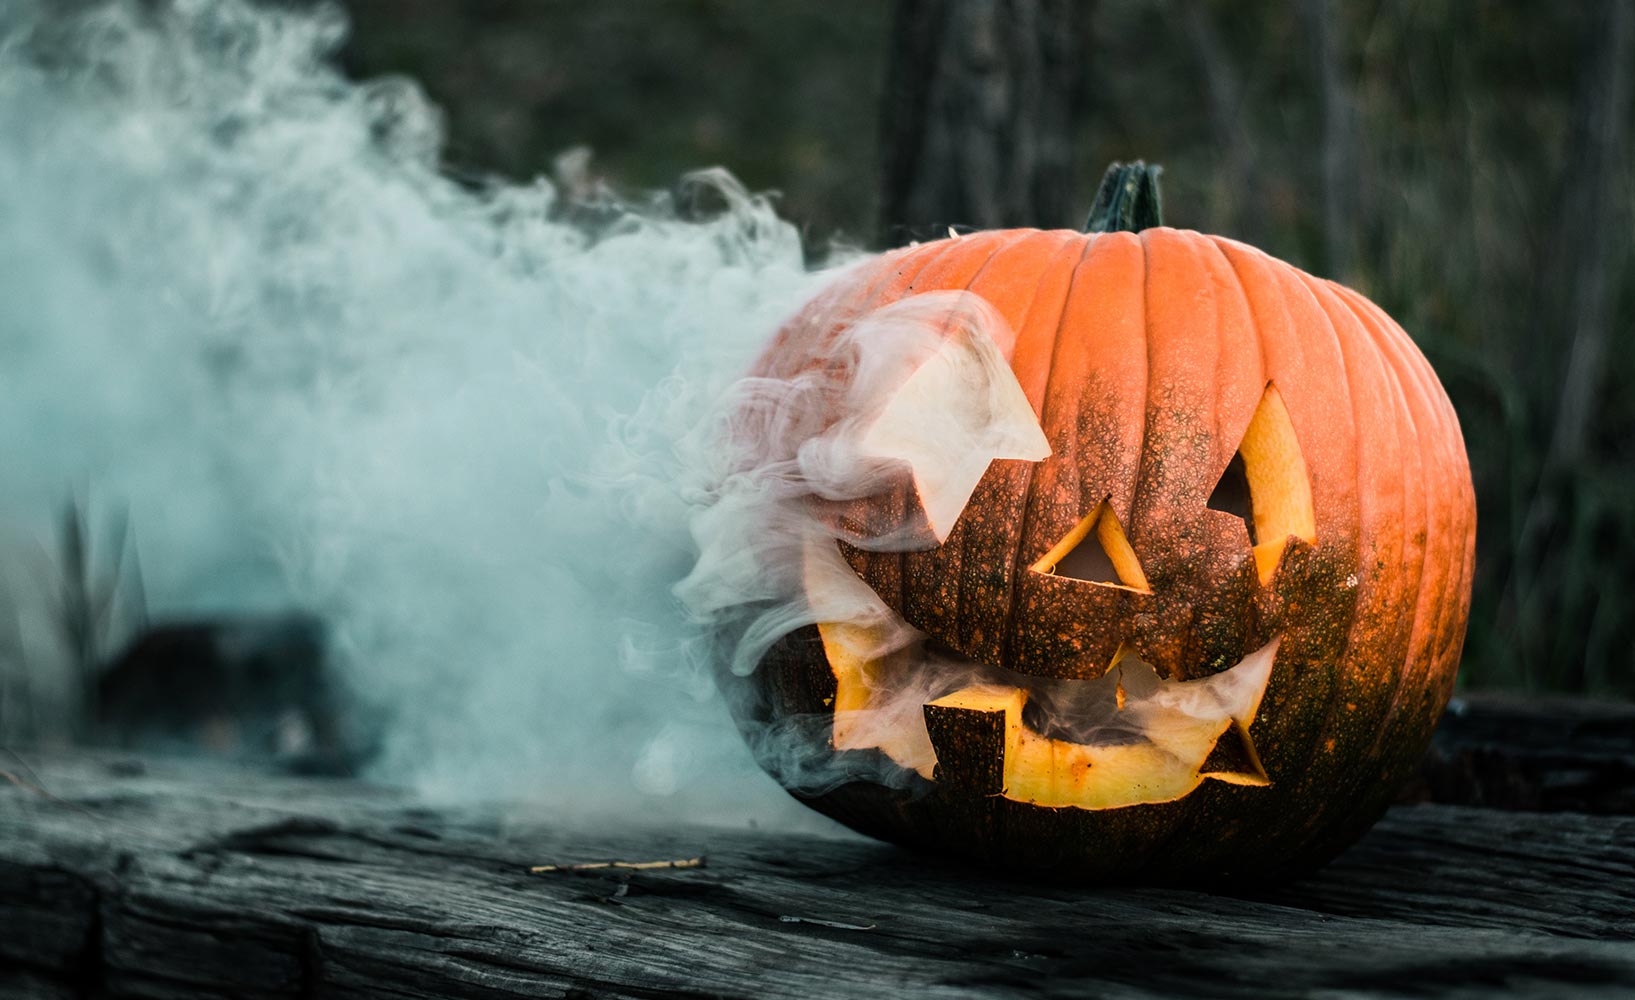 The Most Comprehensive List of Halloween Events in Town